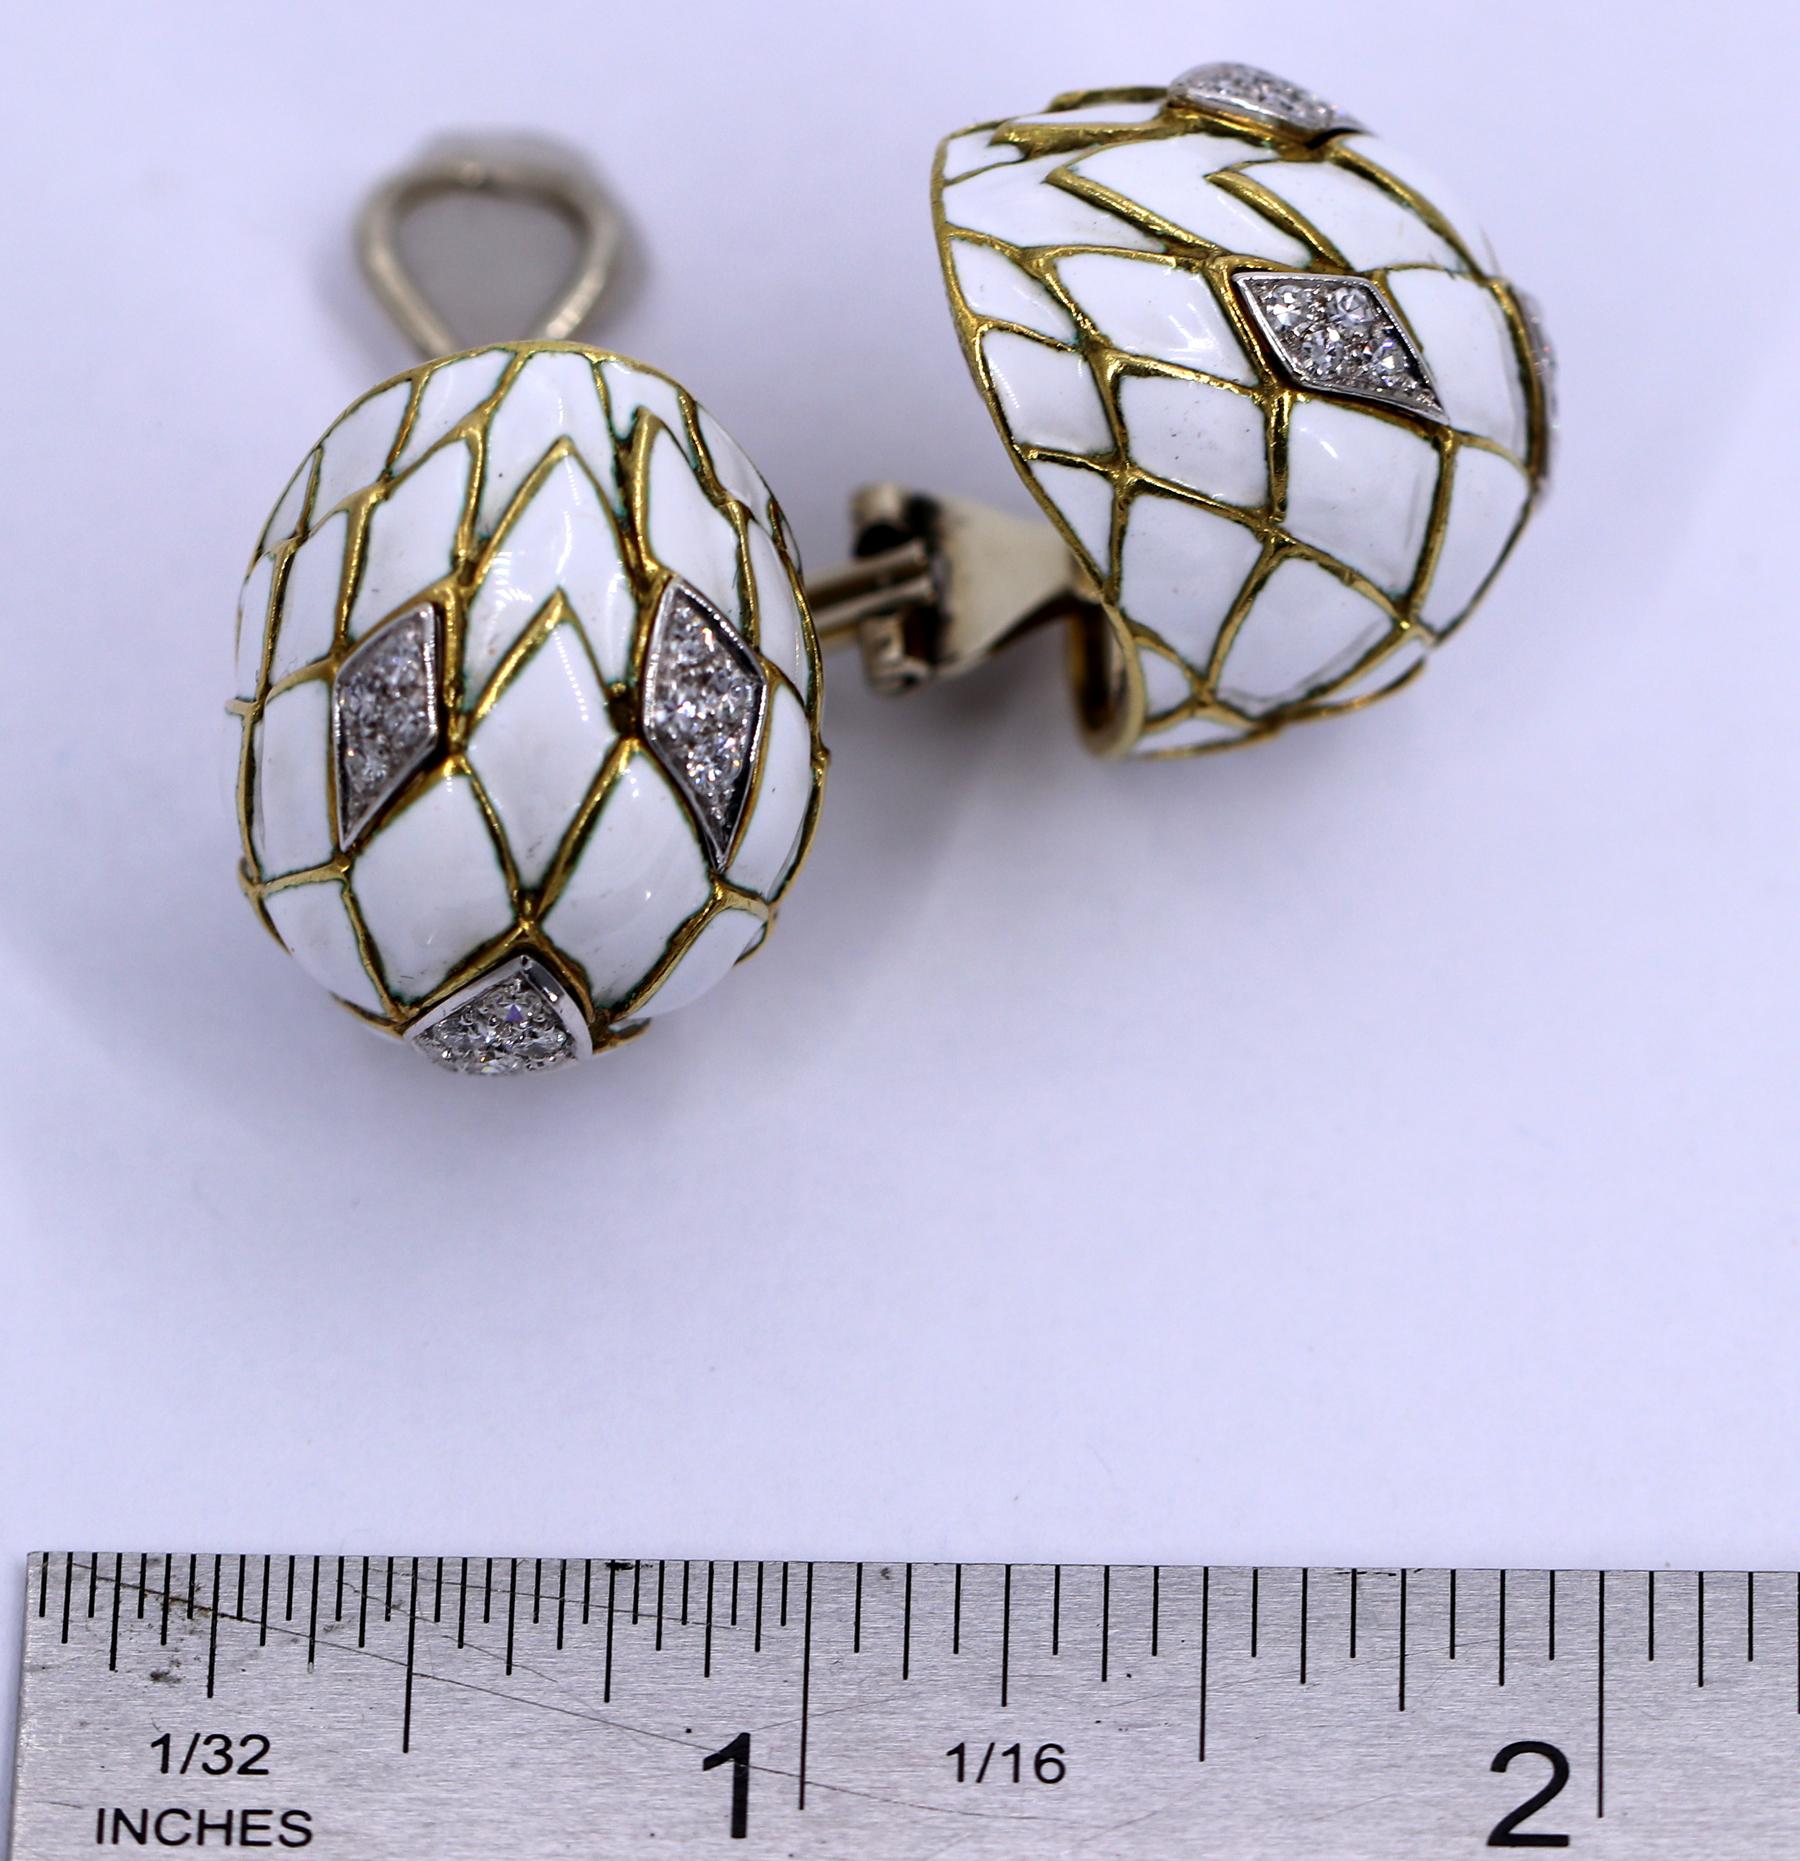 Gold Earrings with White Enamel and Diamonds 1